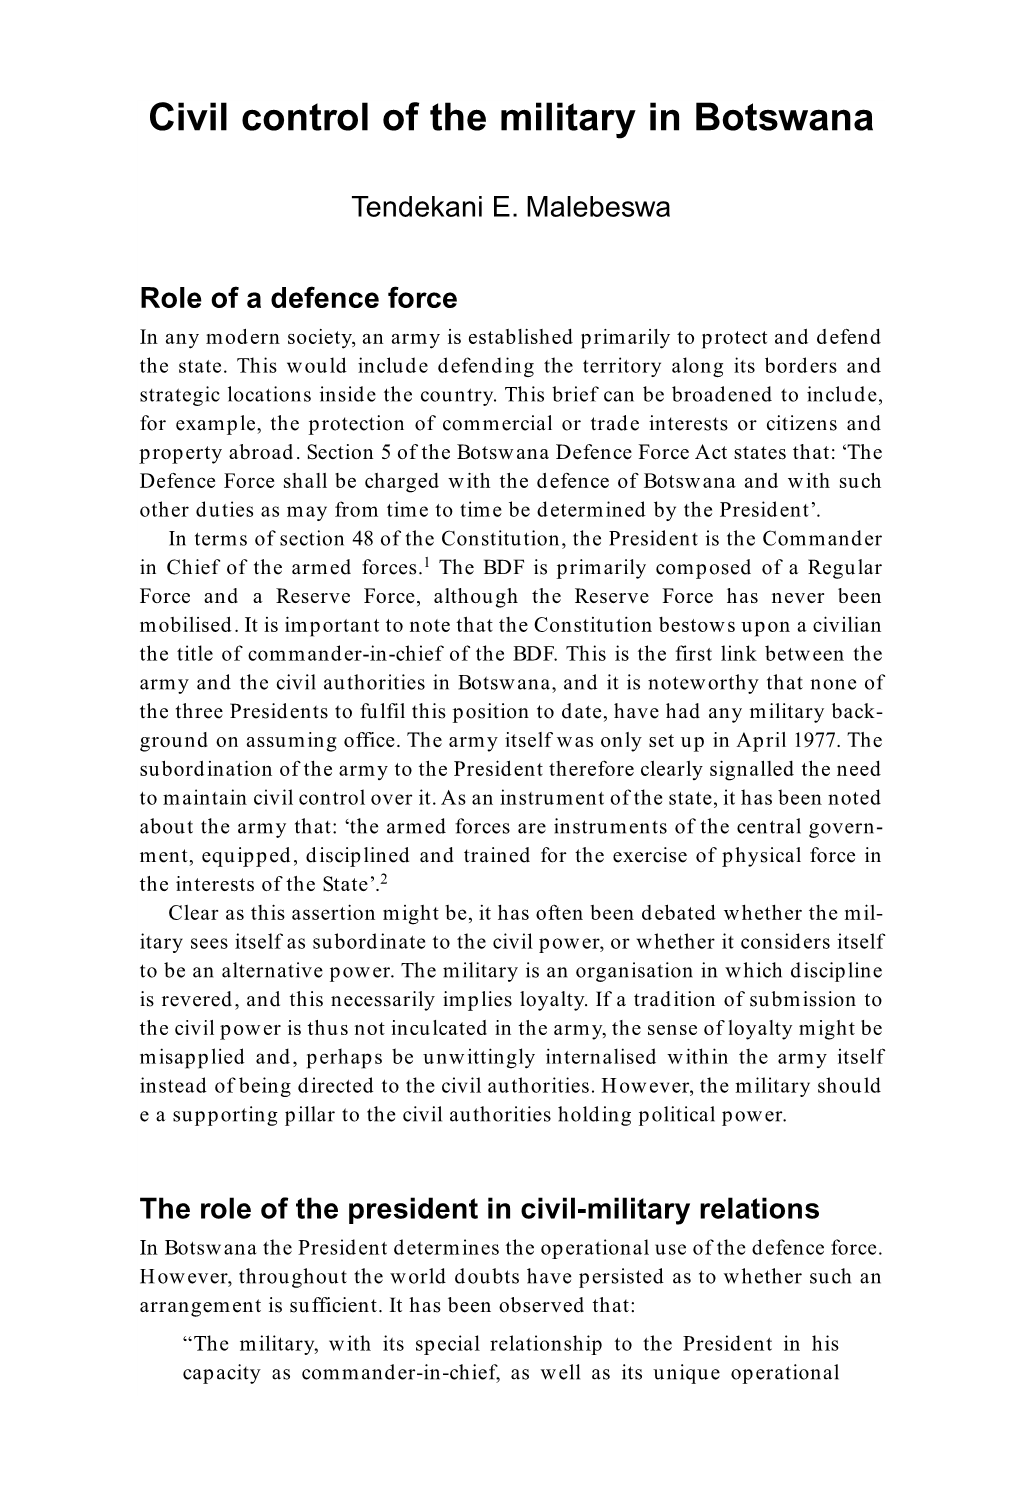 Civil Control of the Military in Botswana